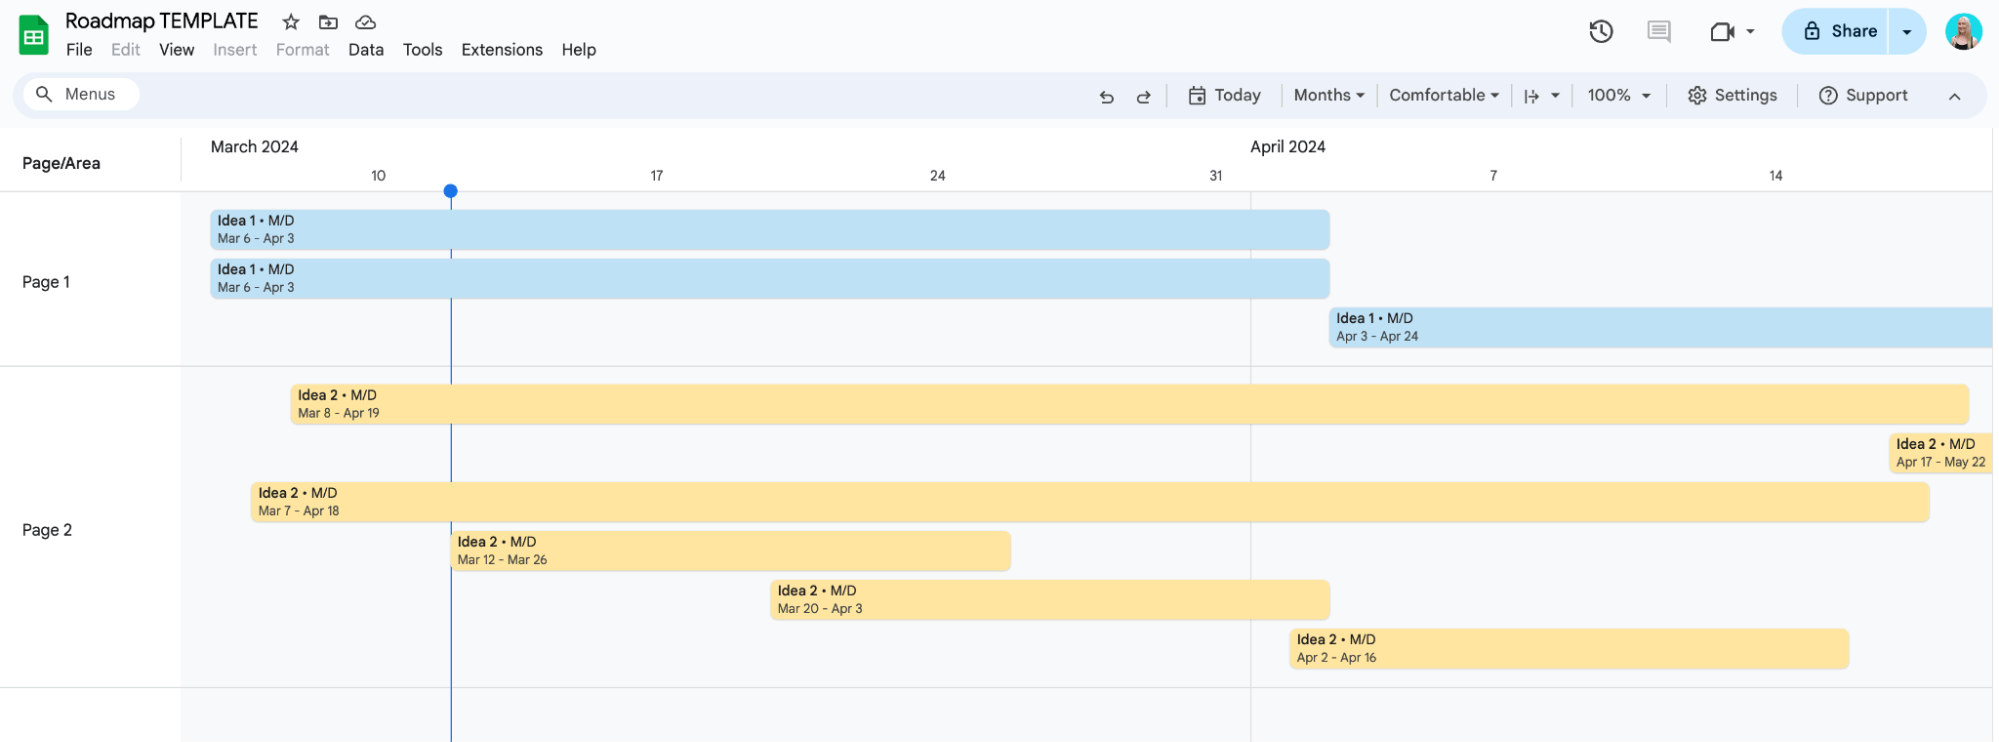 Table View of an A/B testing roadmap with “New” Timeline View in Google Sheets